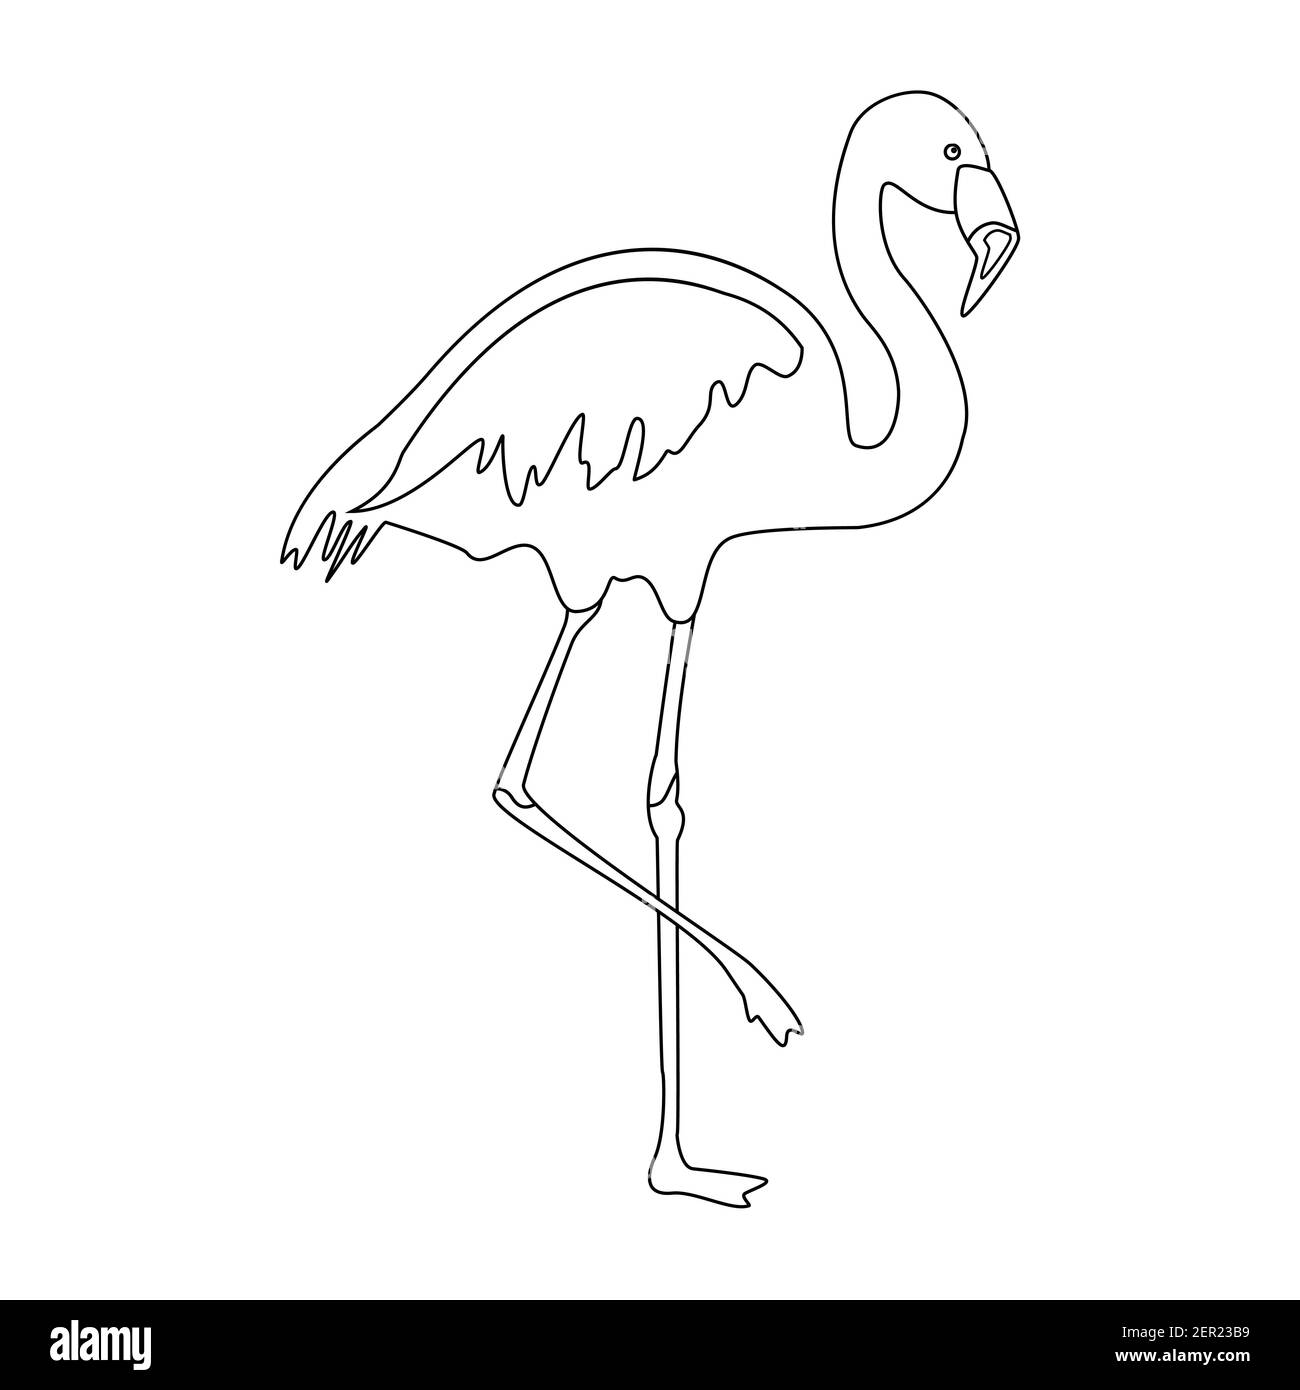 Draw a Flamingo by Diana-Huang on DeviantArt